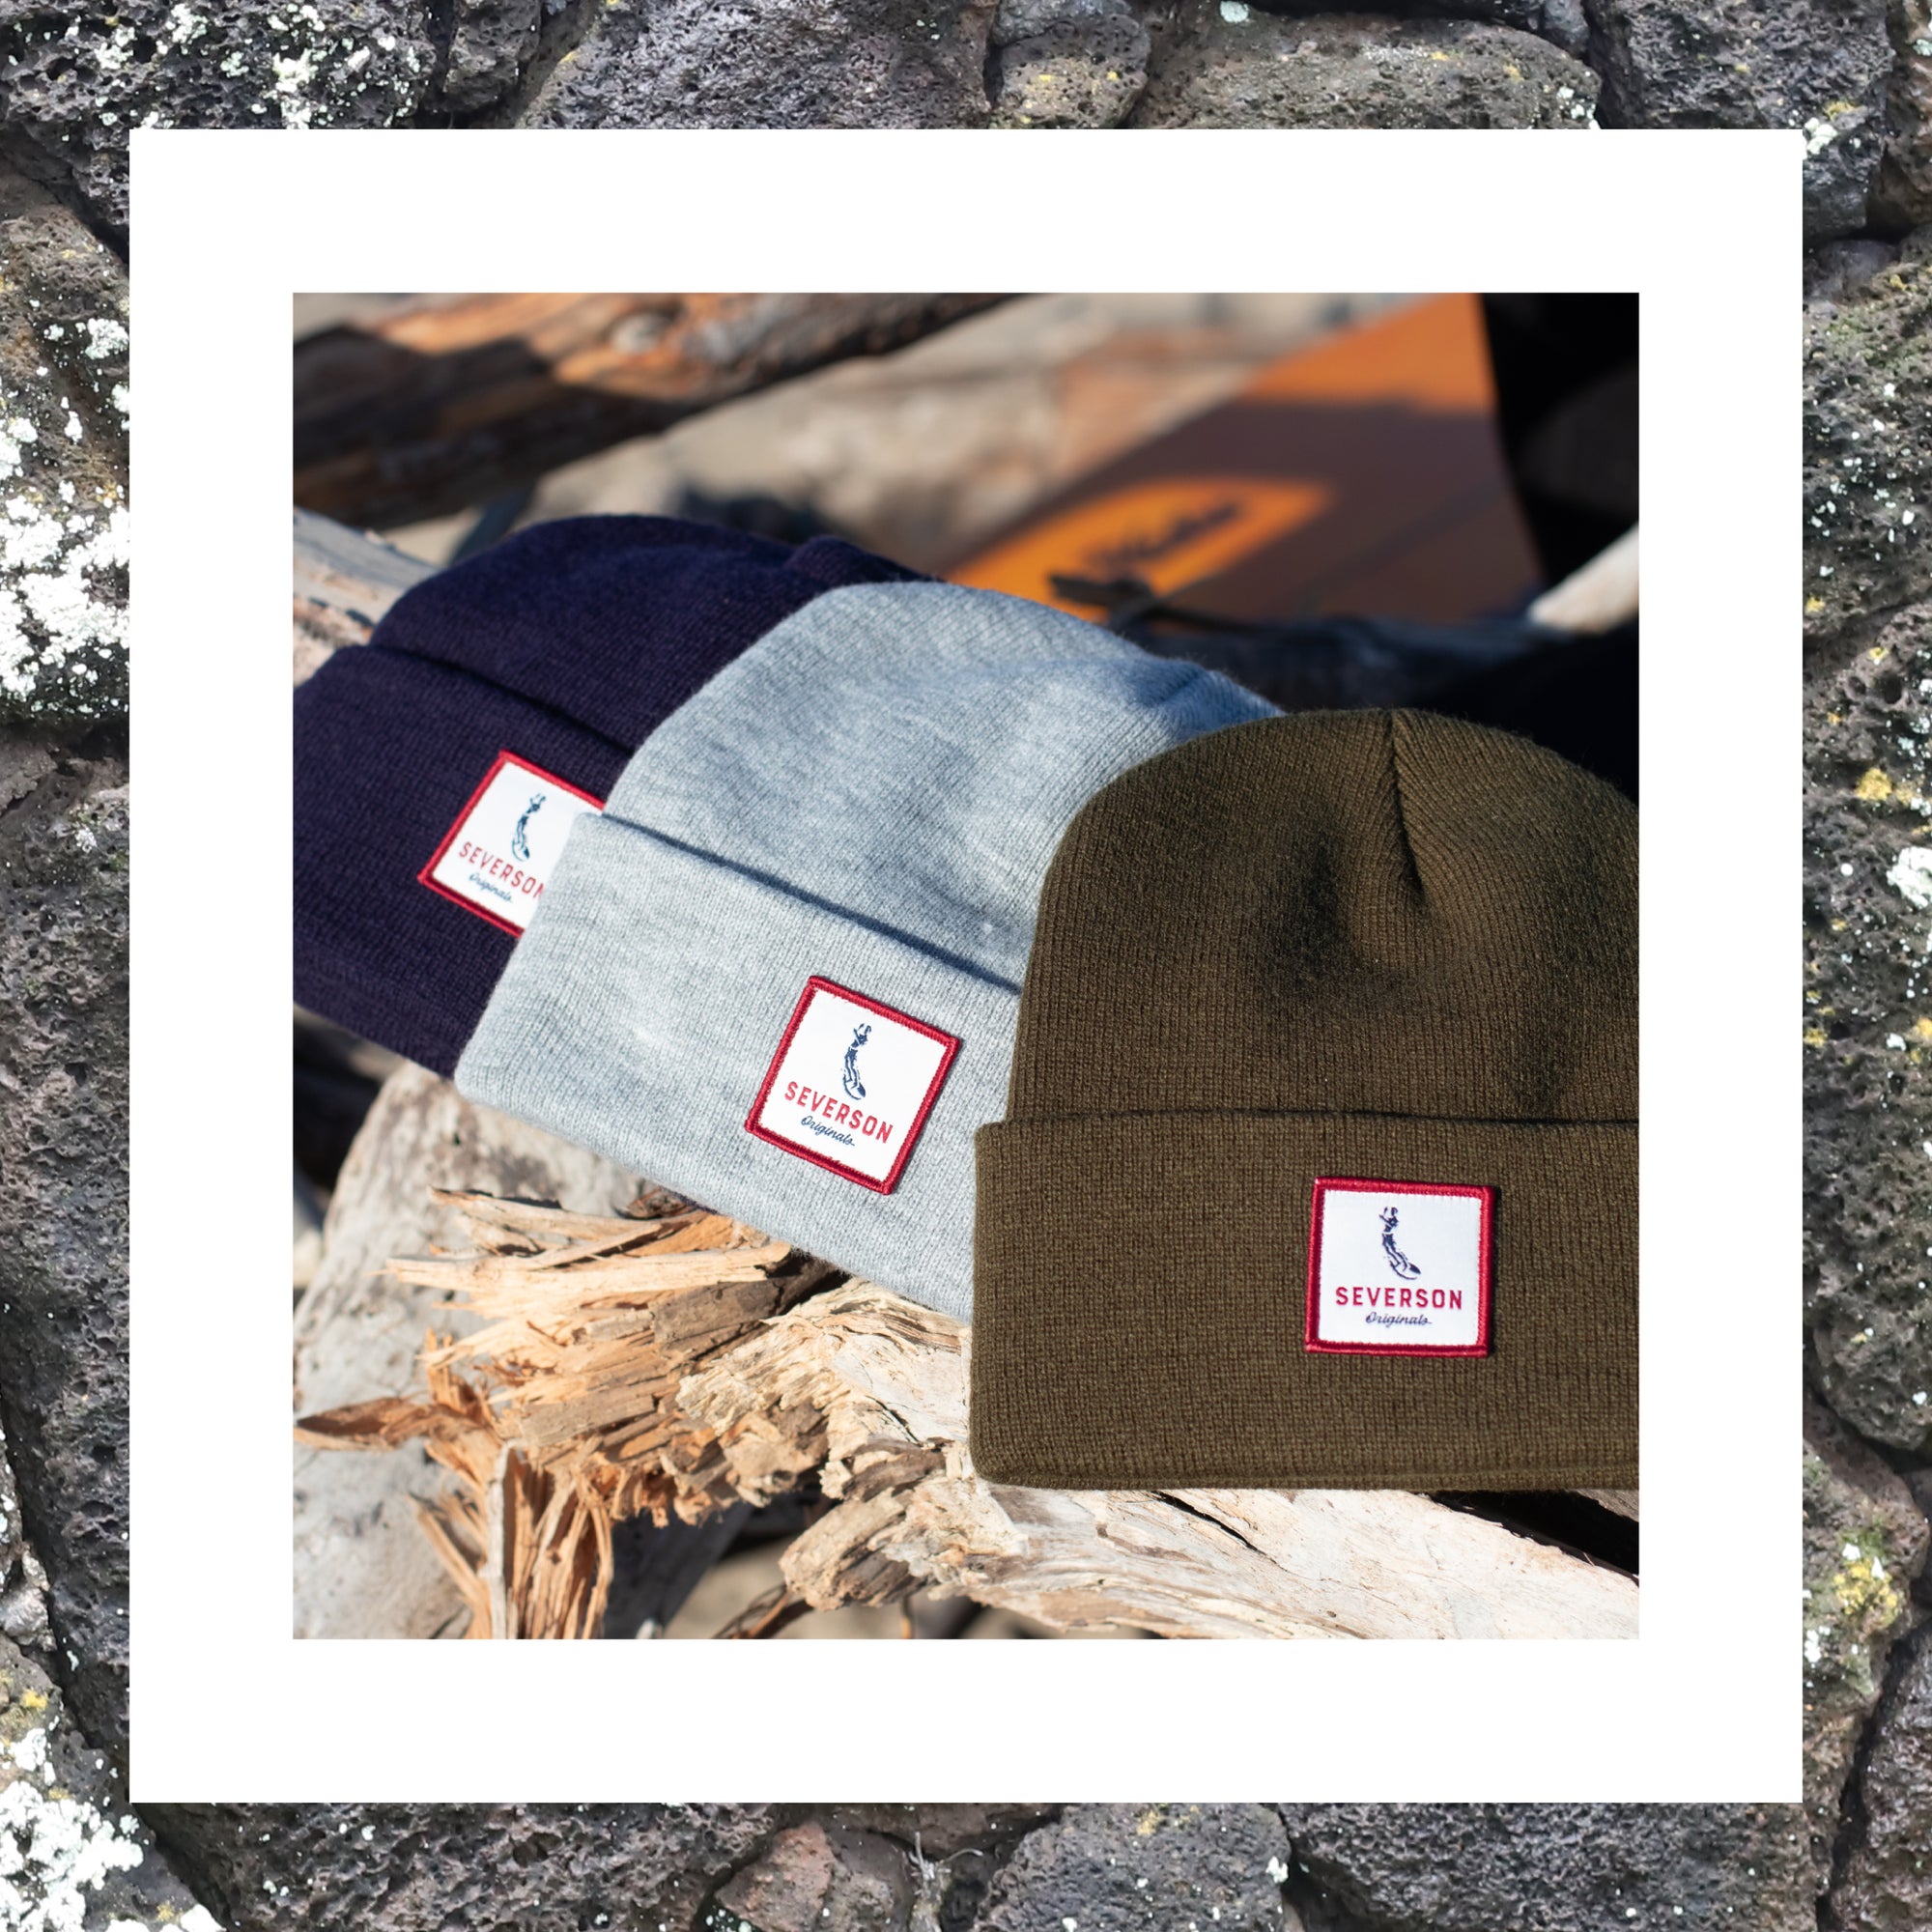 Product spotlight. Severson "Dogpatch" beanies. Available in multiple colors.